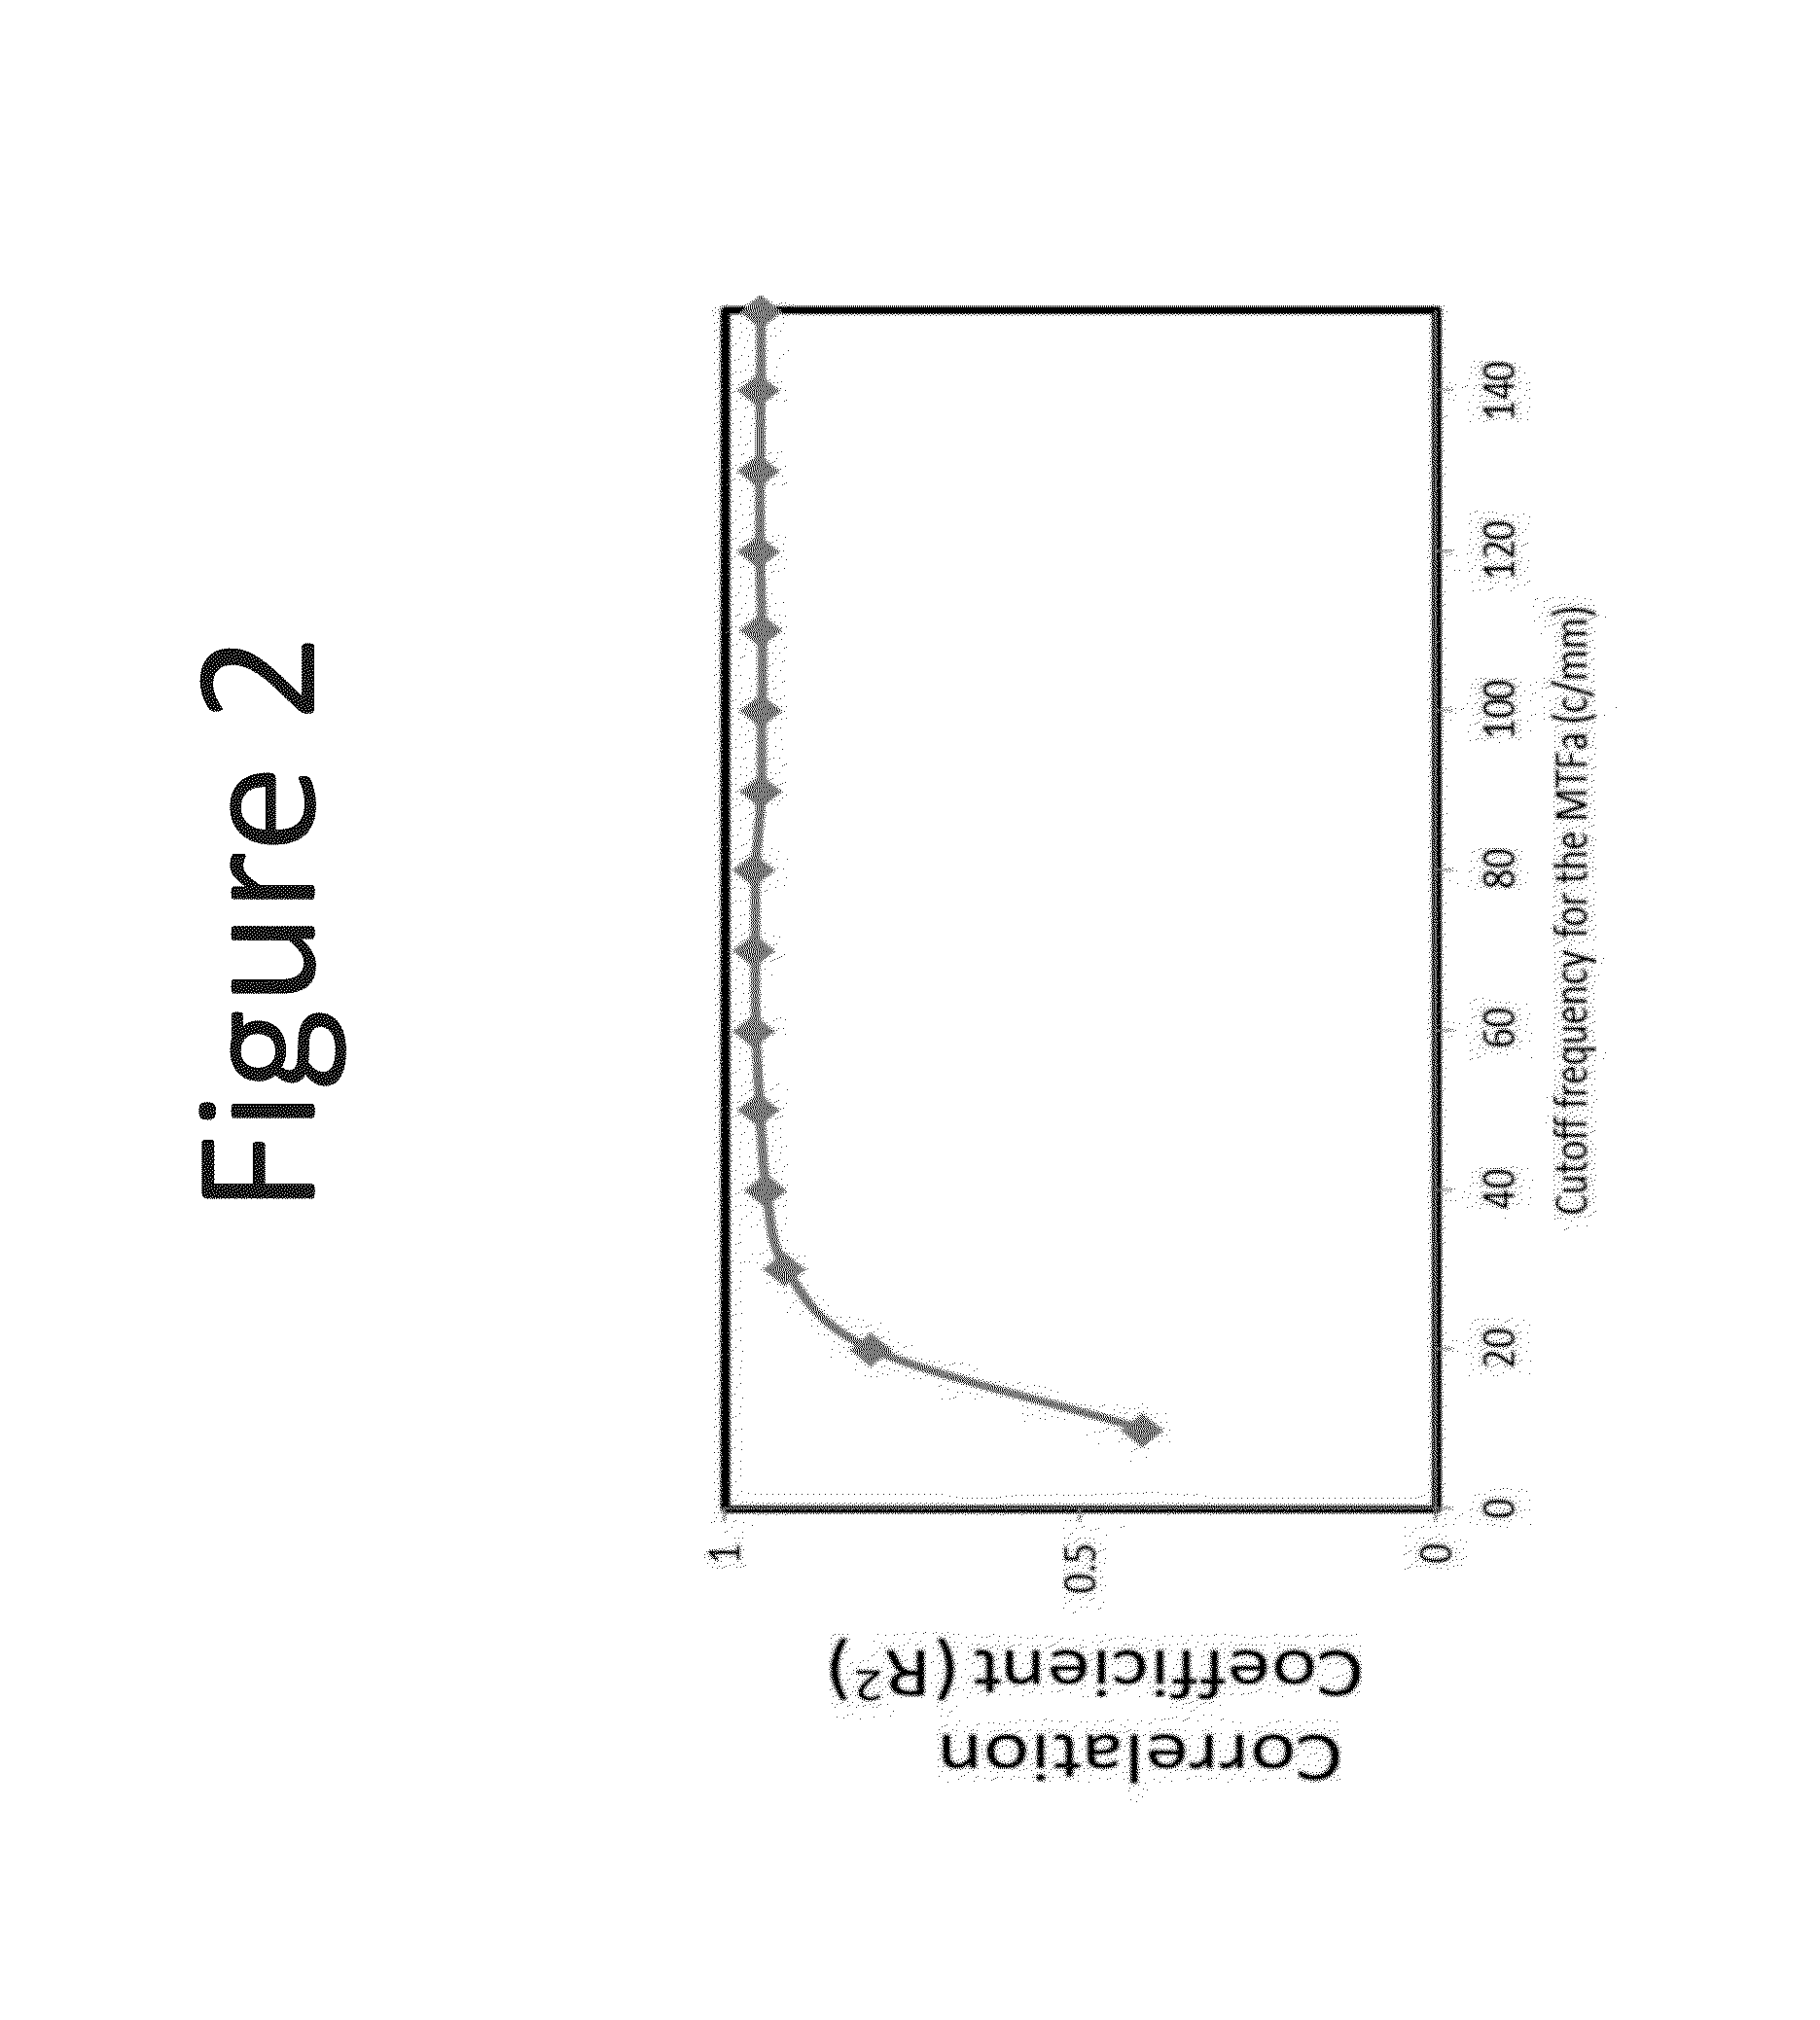 Apparatus, systems and methods for improving visual outcomes for pseudophakic patients